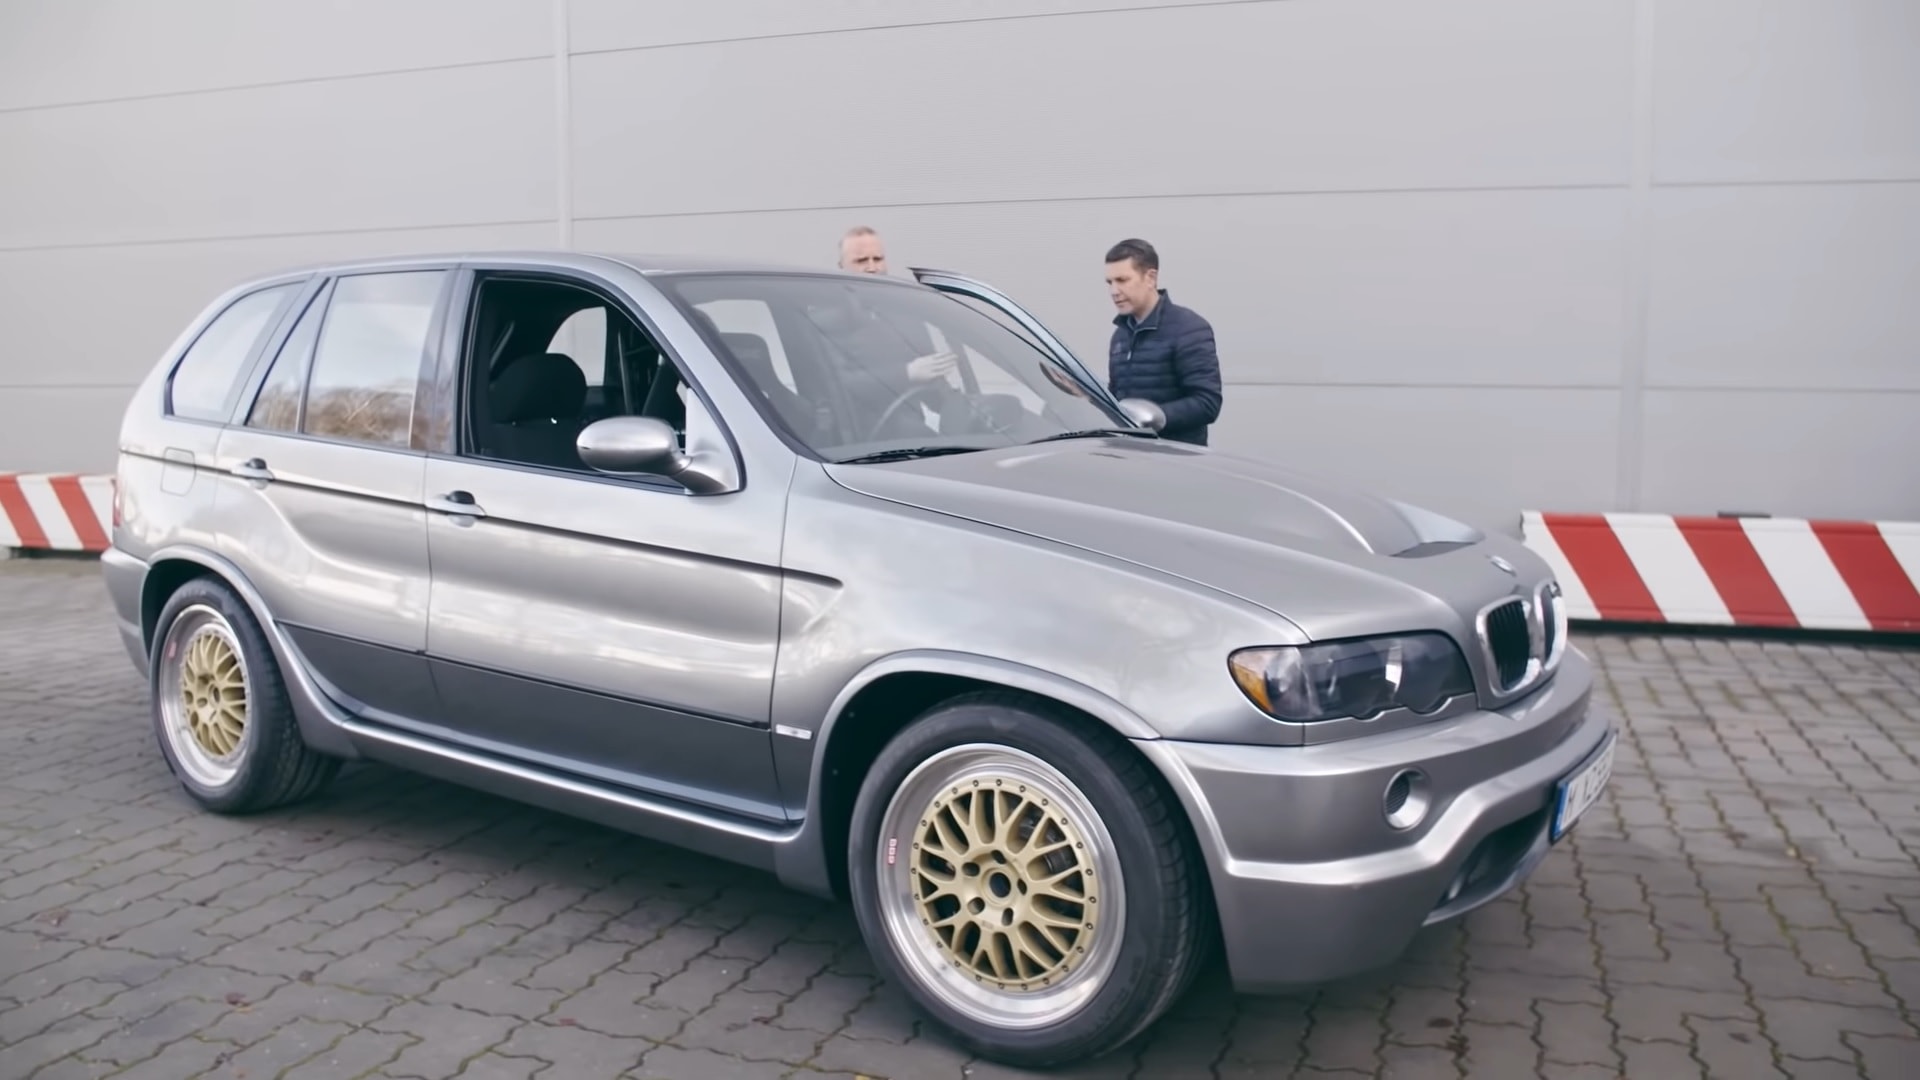 The 2000 BMW X5 “Le Mans” Is Rocking Very Loud V12 Racing Engine - autoevolution